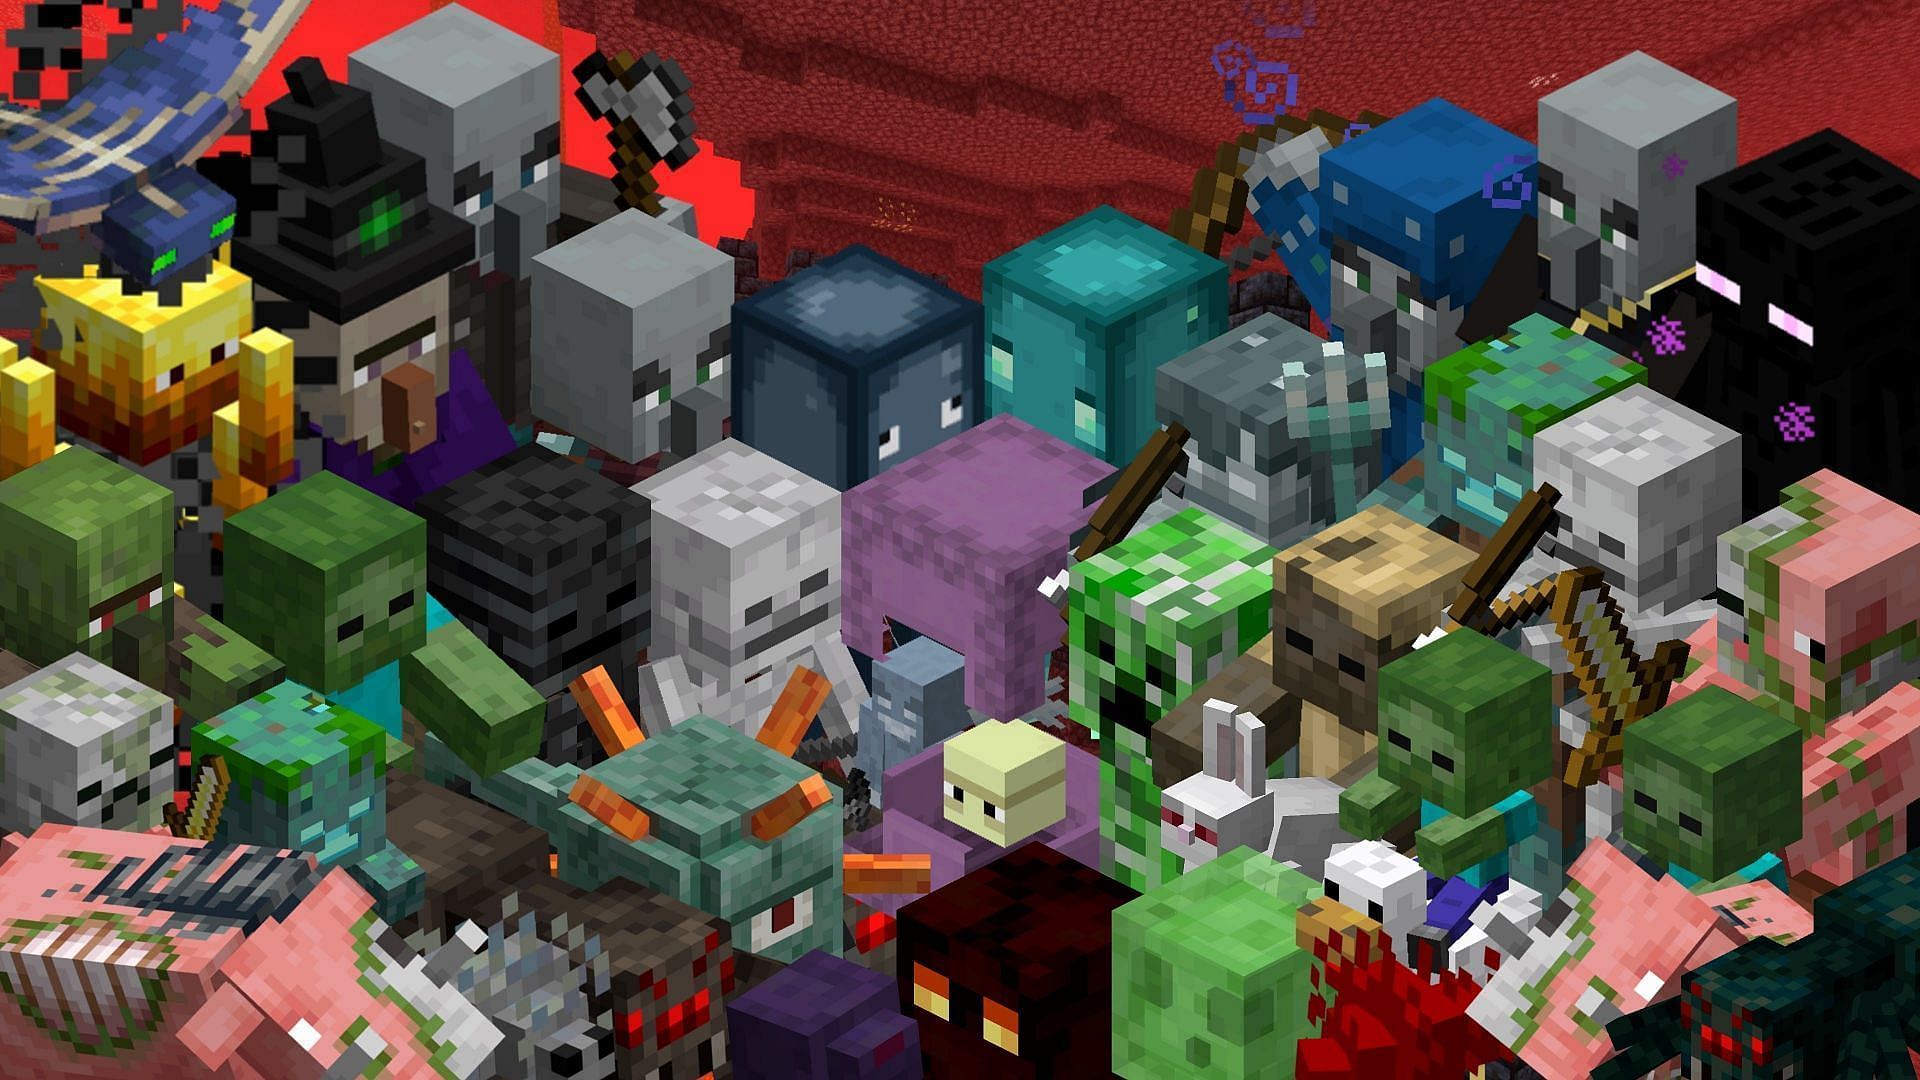 Hostile mobs scour the overworld in search of players to torment (Image via Minecraft)